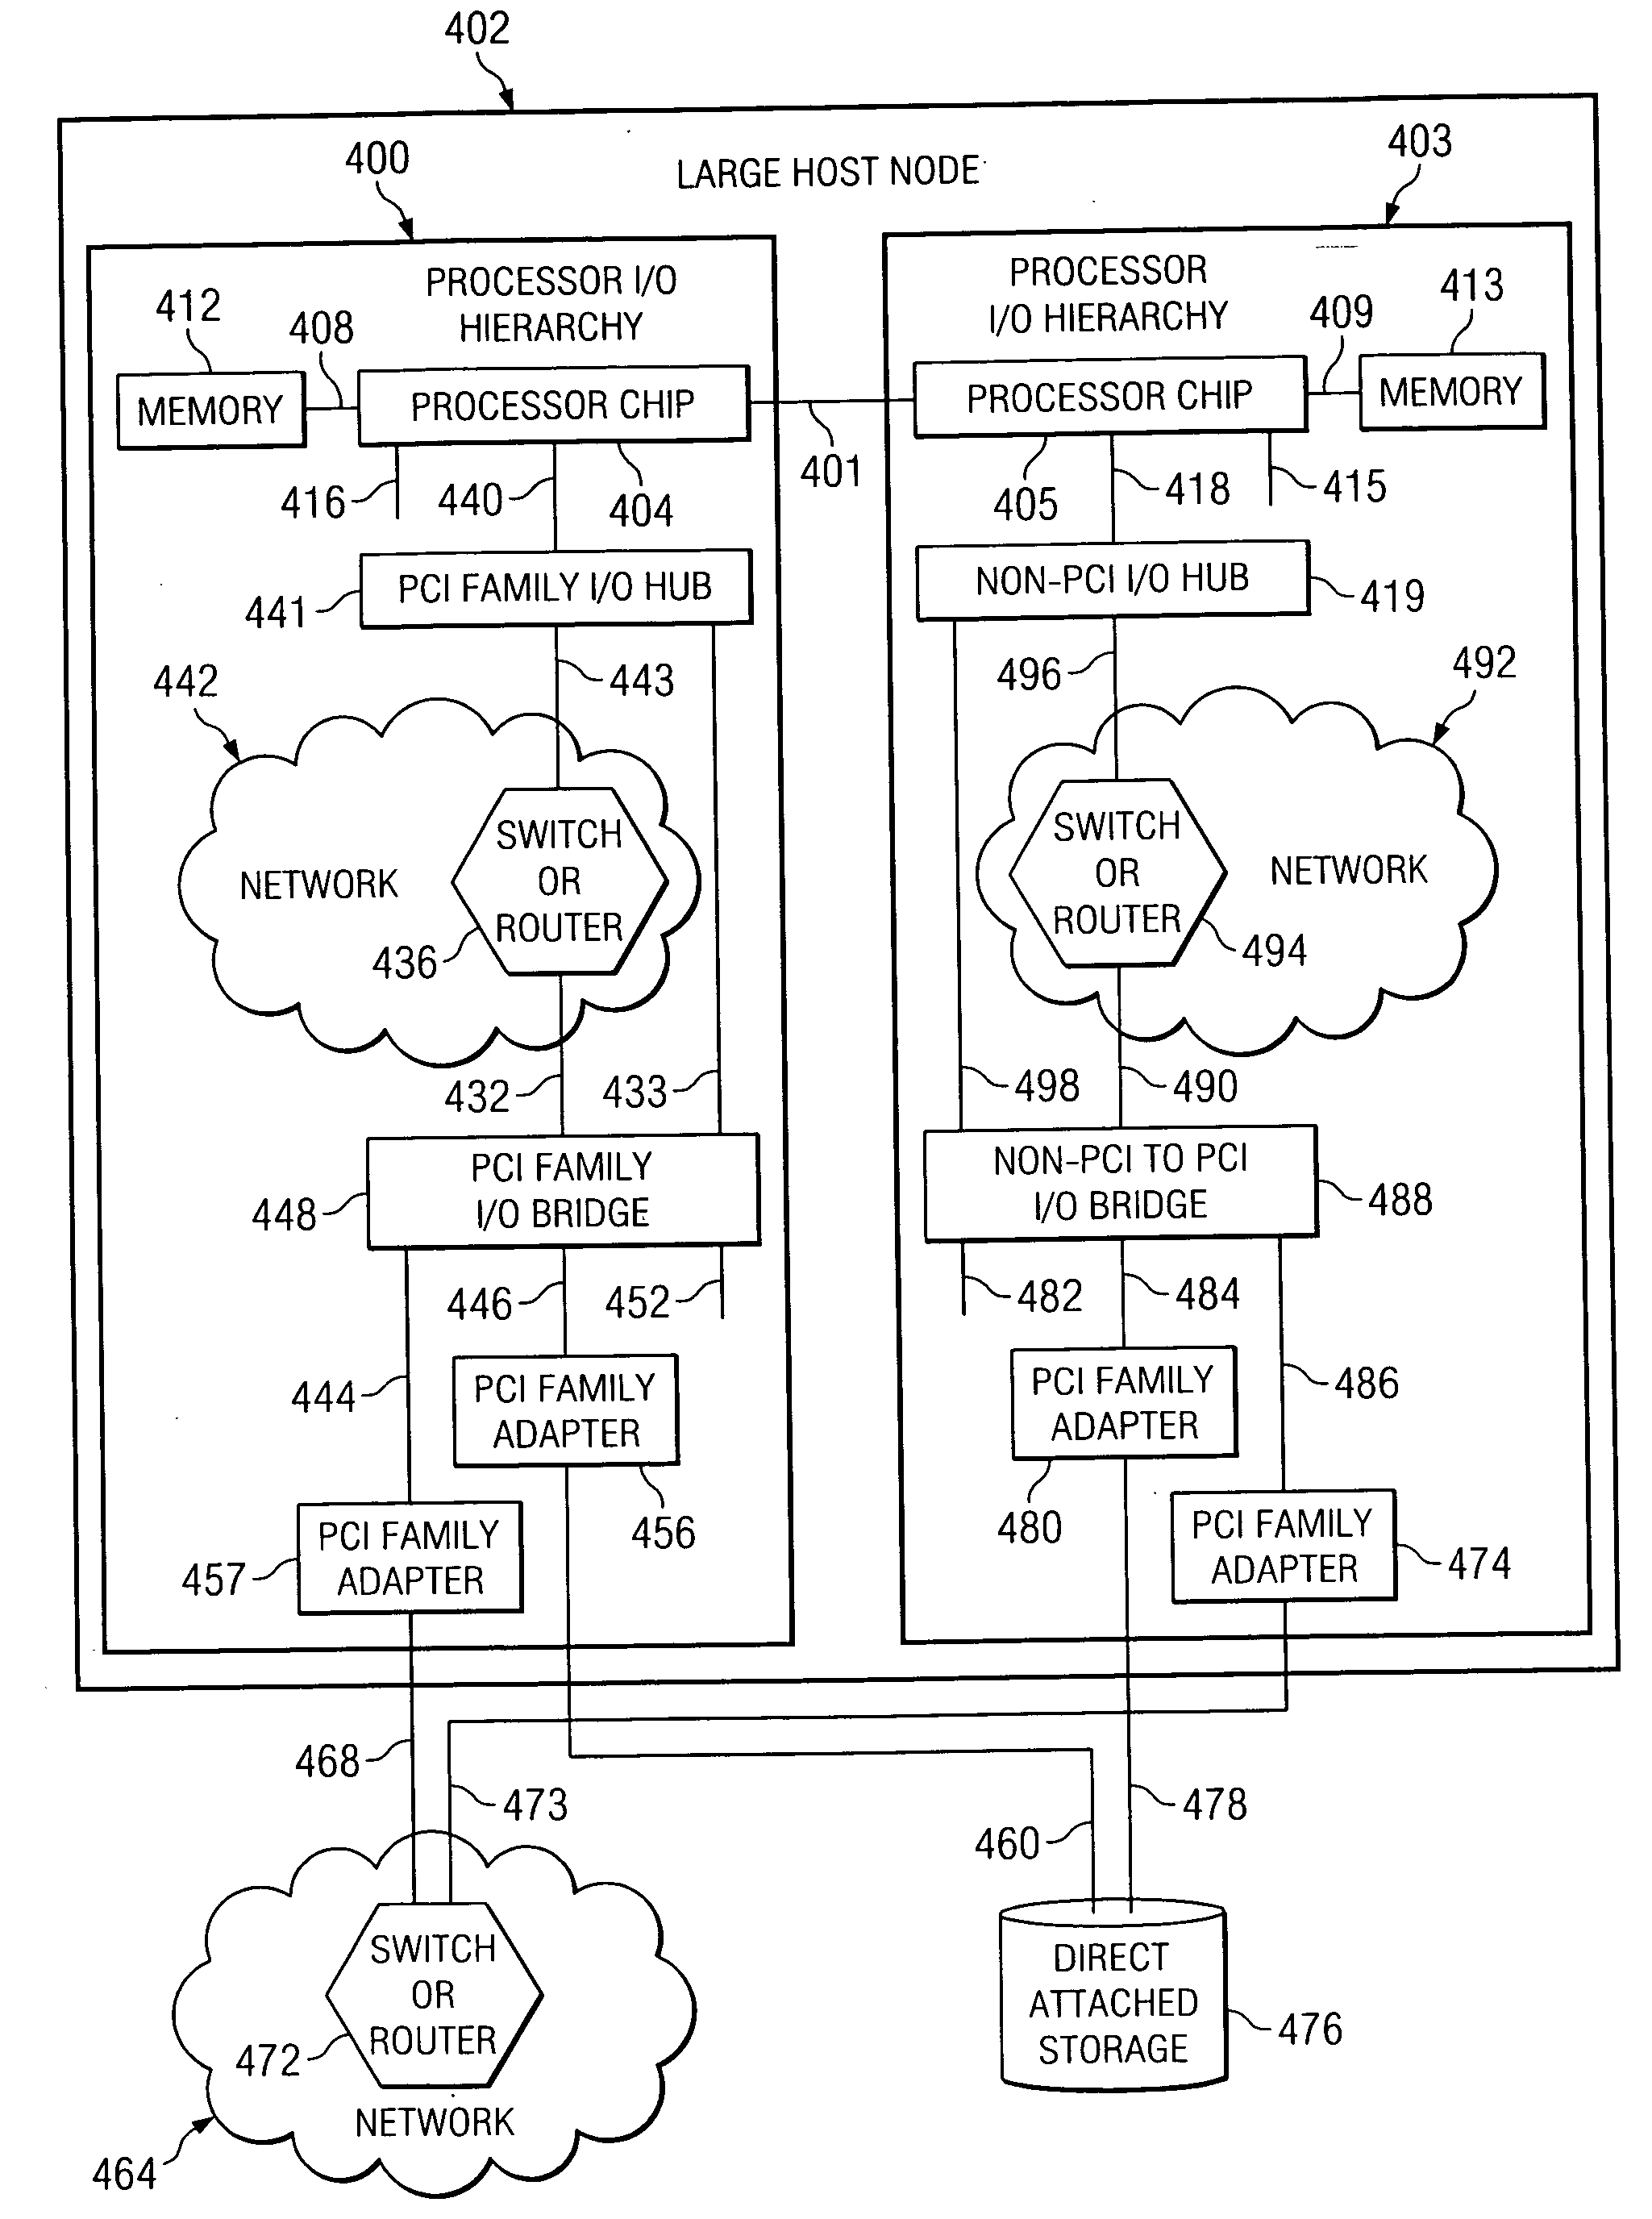 System and method for destroying virtual resources in a logically partitioned data processing system